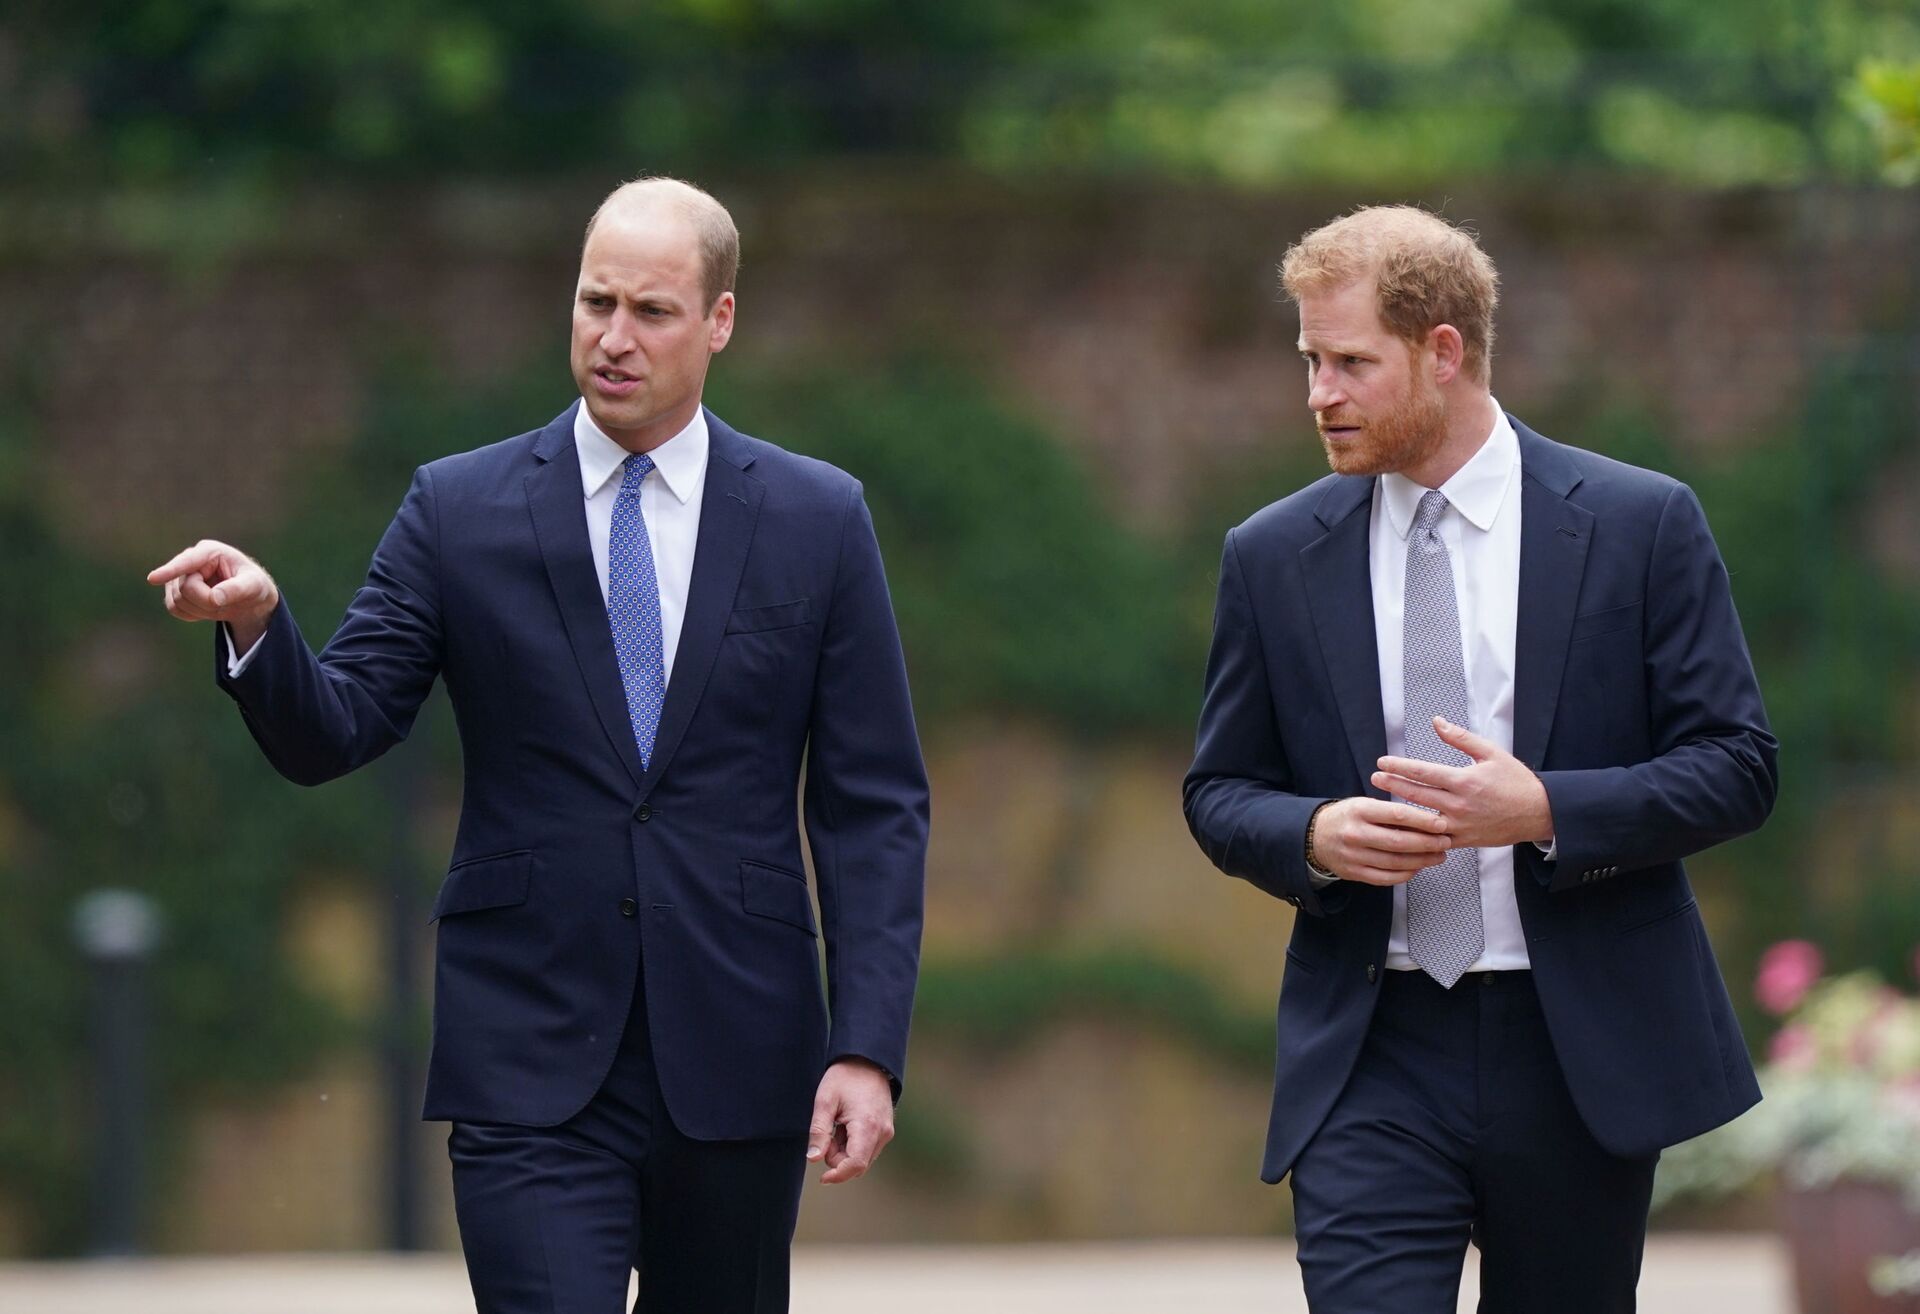 Britain's Prince William, The Duke of Cambridge, and Prince Harry, Duke of Sussex, attend the unveiling of a statue they commissioned of their mother Diana, Princess of Wales, in the Sunken Garden at Kensington Palace, London, Britain July 1, 2021 - Sputnik International, 1920, 07.09.2021